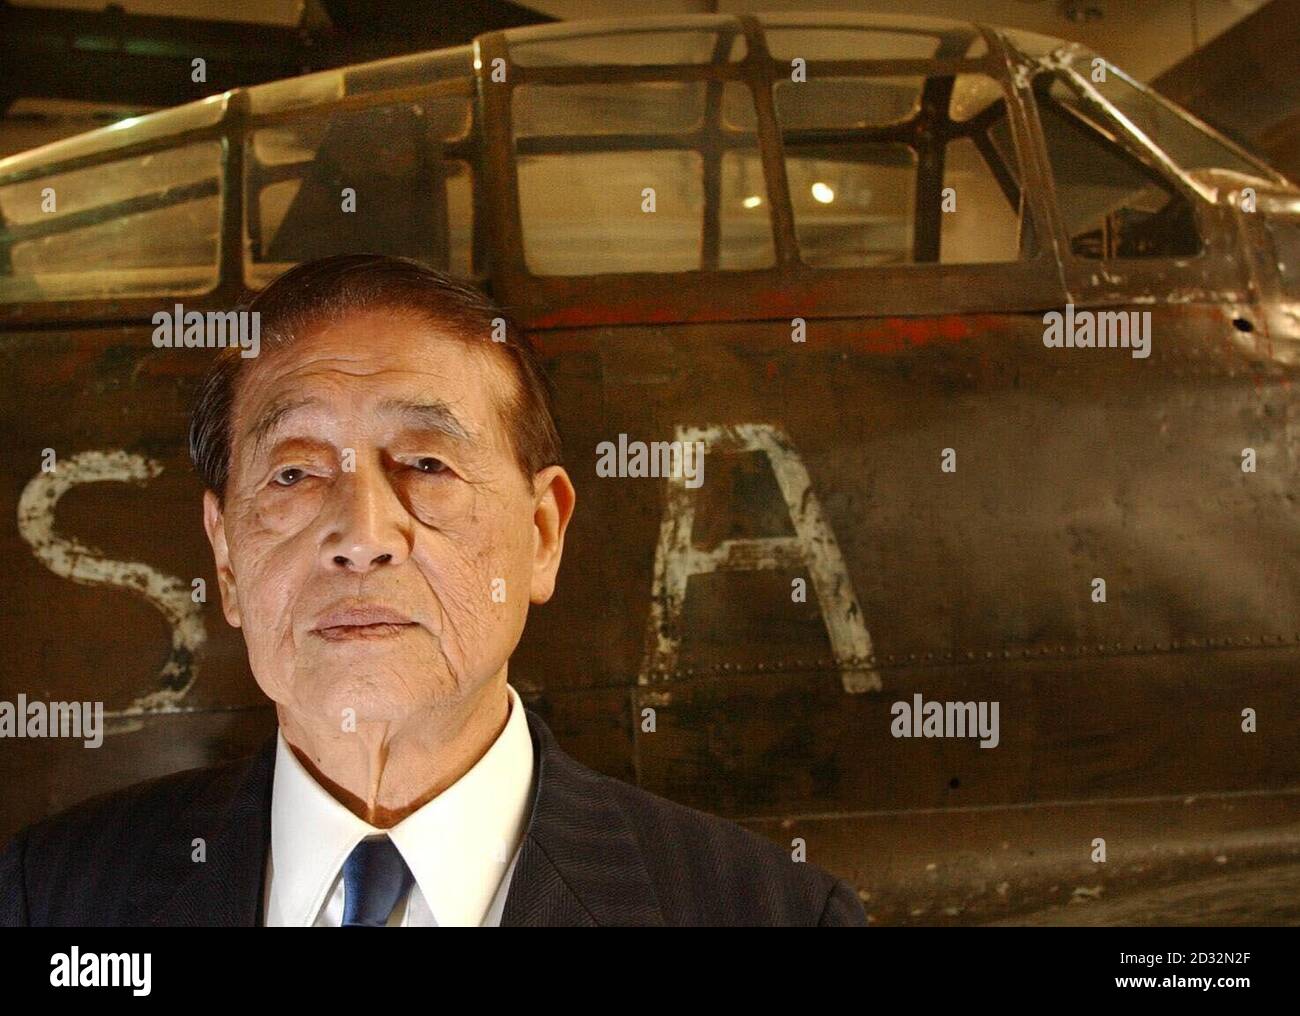 Hichiro Naemura, 82, an ex-Kamikaze pilot in the Japanese Air Force in the Second World War, stands in front of a 'Zero' fighter plane at the Imperial War Museum.   *...Hichiro Naemura was one of only a few surviving airmen from the conflict in the Pacific, which saw thousands of young Japanese men kill themselves in officially sanctioned suicide attacks on allied warships. He was in London to help launch Kamikaze: Japan's Suicide Gods, a new book in which his story is told. Stock Photo